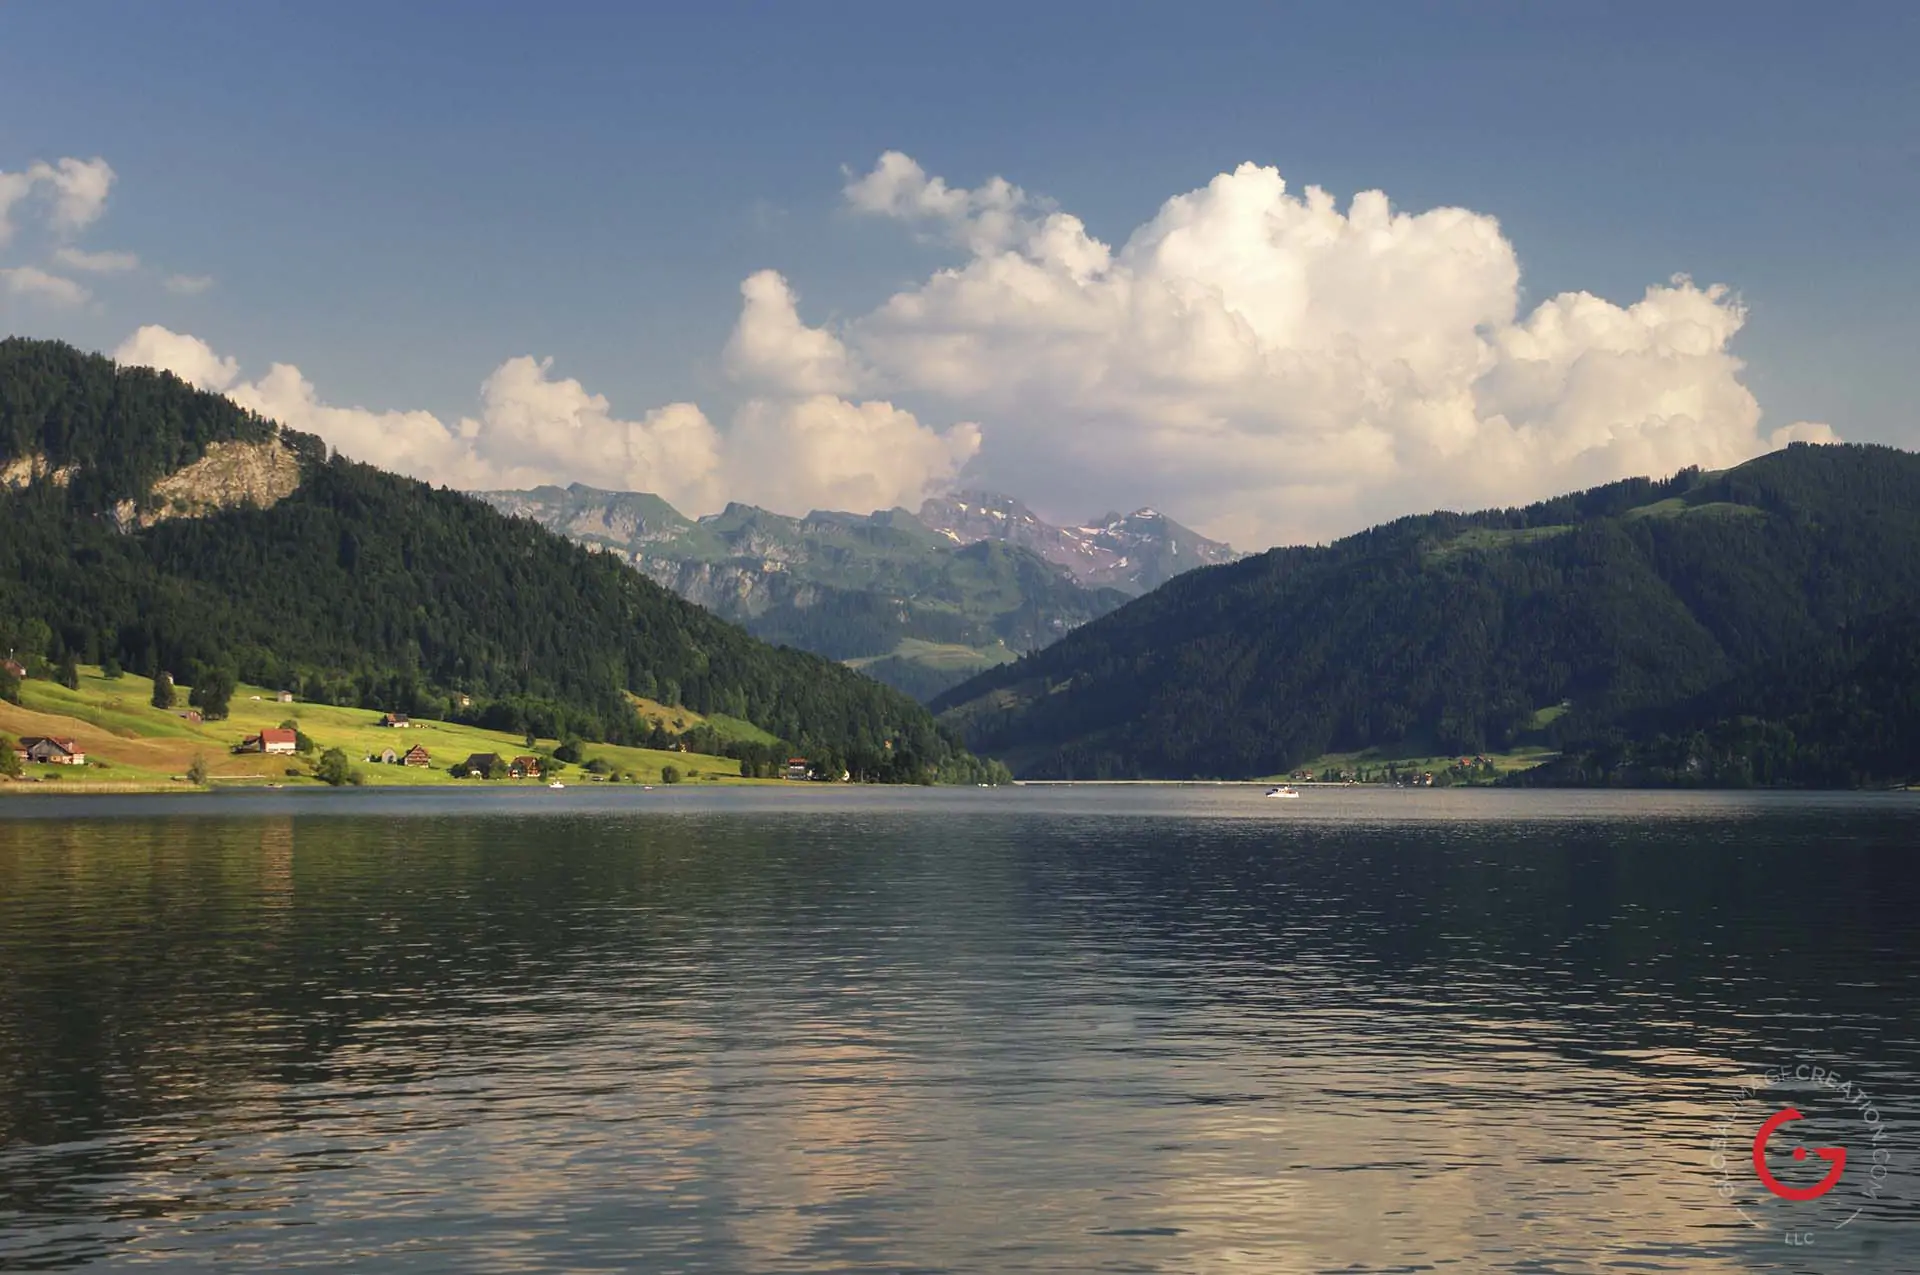 A Swiss Lake and Clouds - Travel Photographer and Switzerland Photography